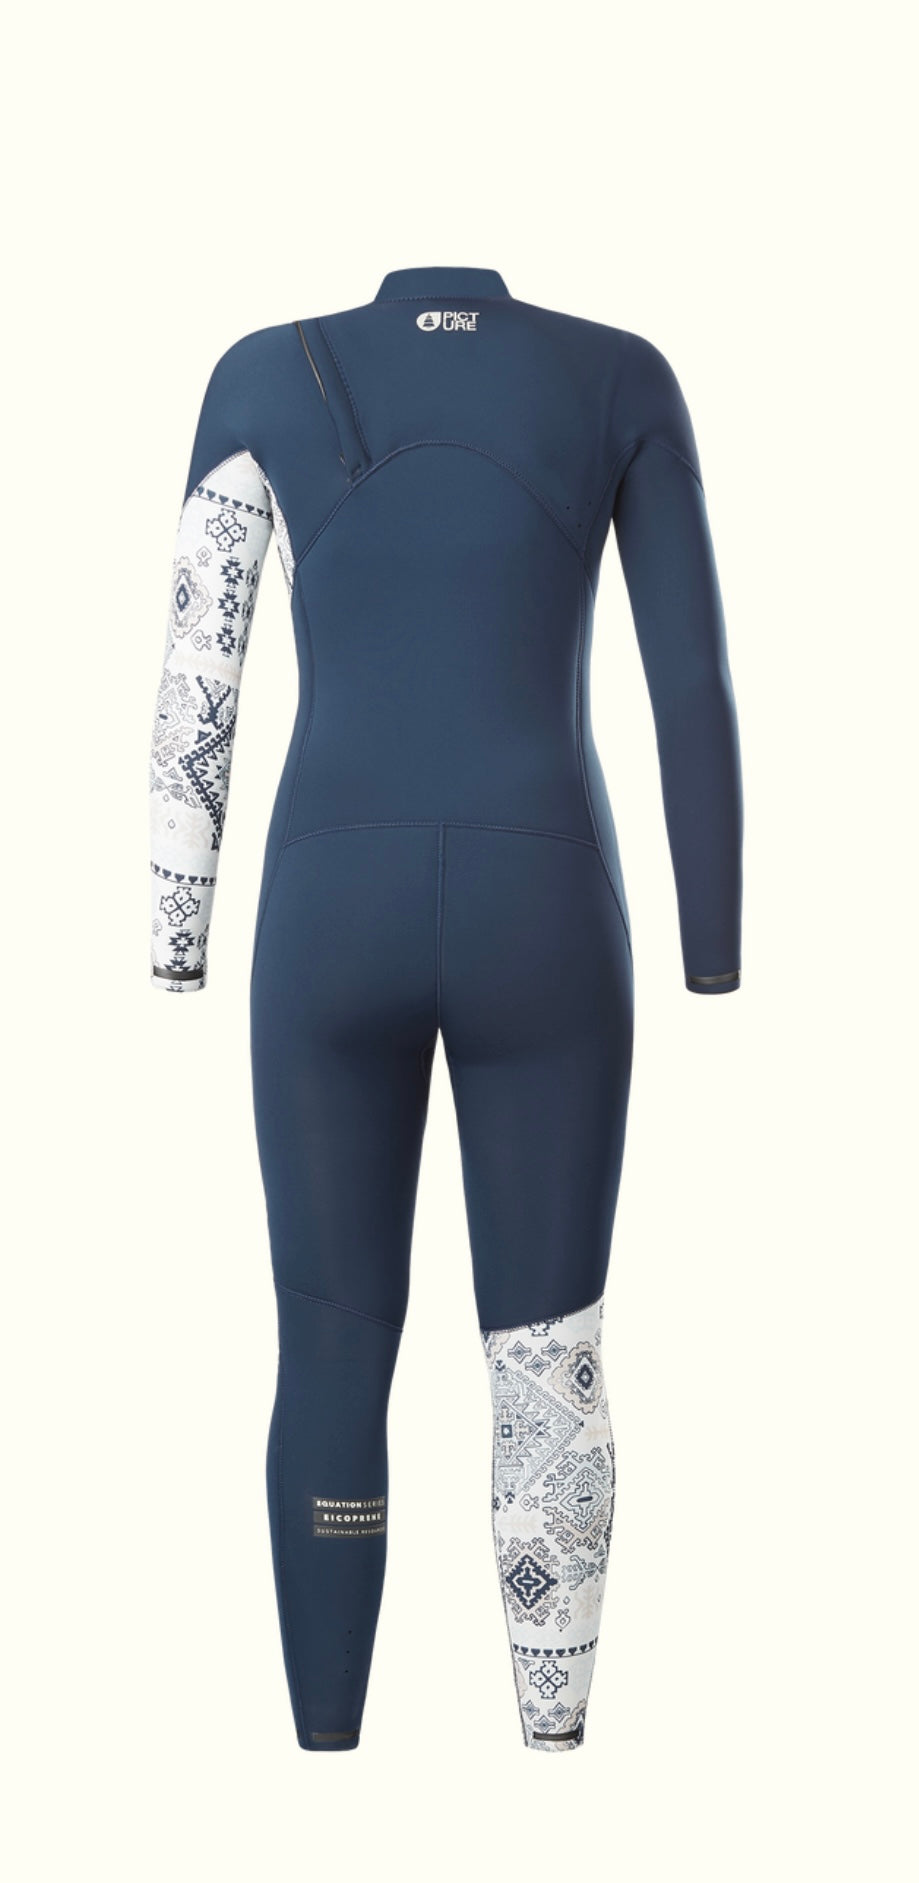 Picture Women's Equation 4/3 FZ Wetsuit ARKA Print